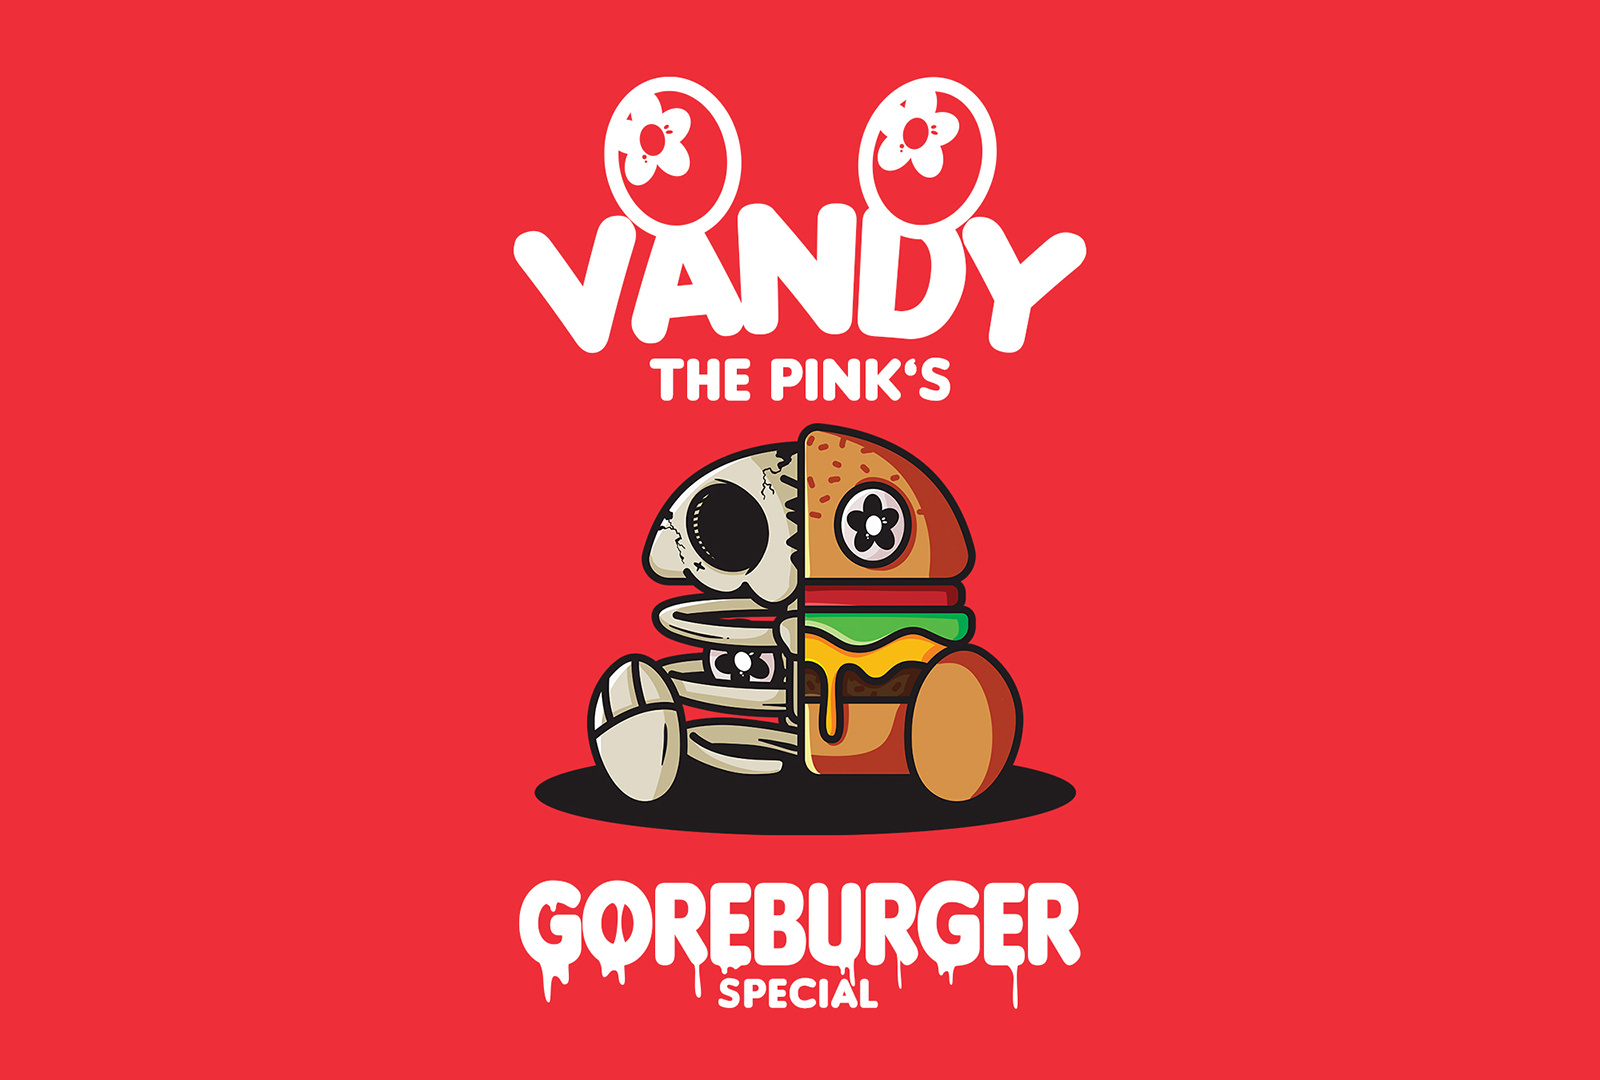 Vandy The Pink  Goreburger Special by Paul Vu on Dribbble